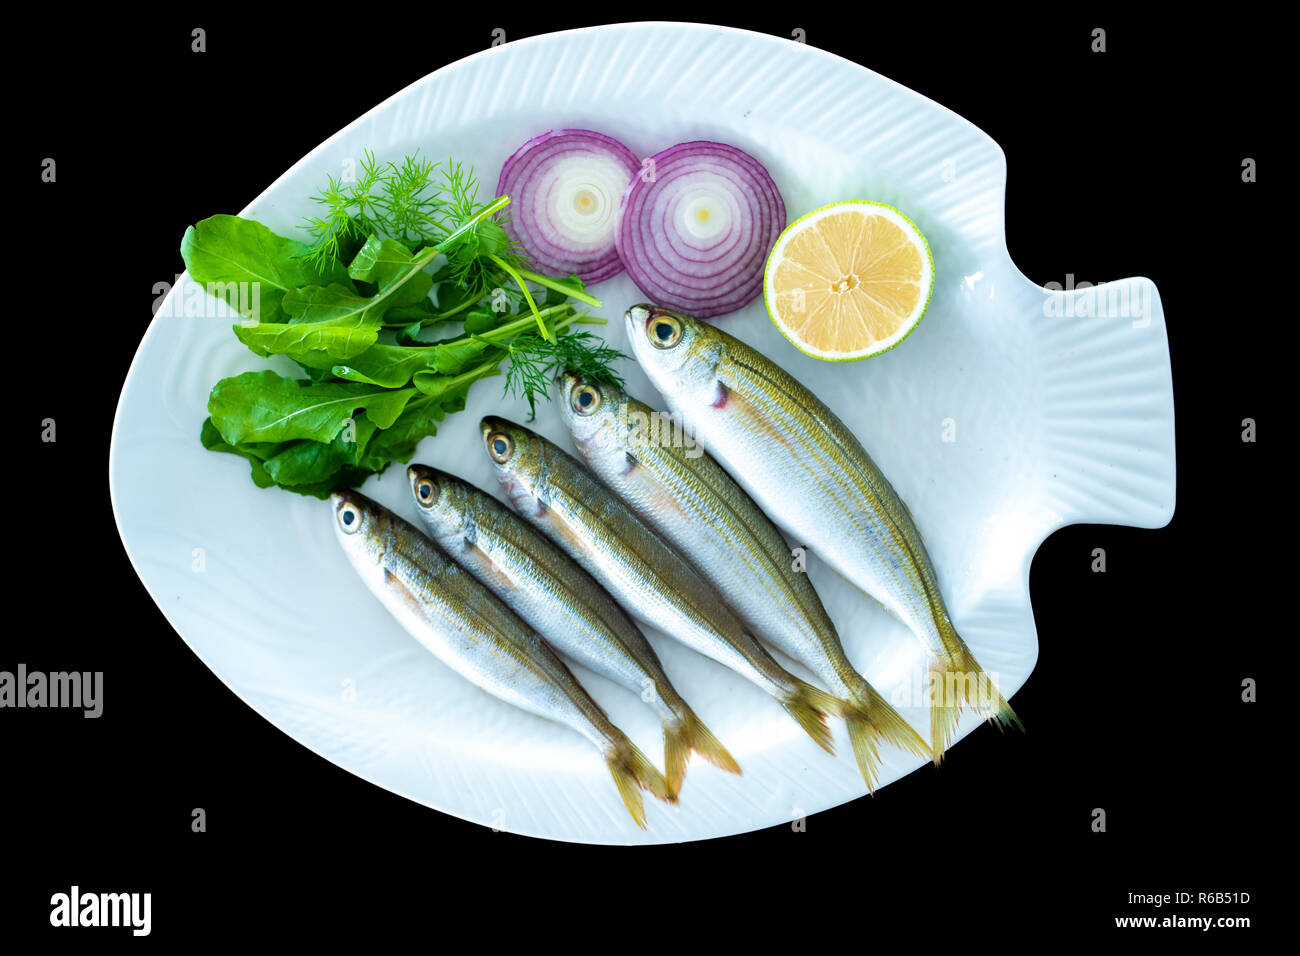 Bogue fish also known as Boops boops with rockets leaves served on white plate with black background Stock Photo